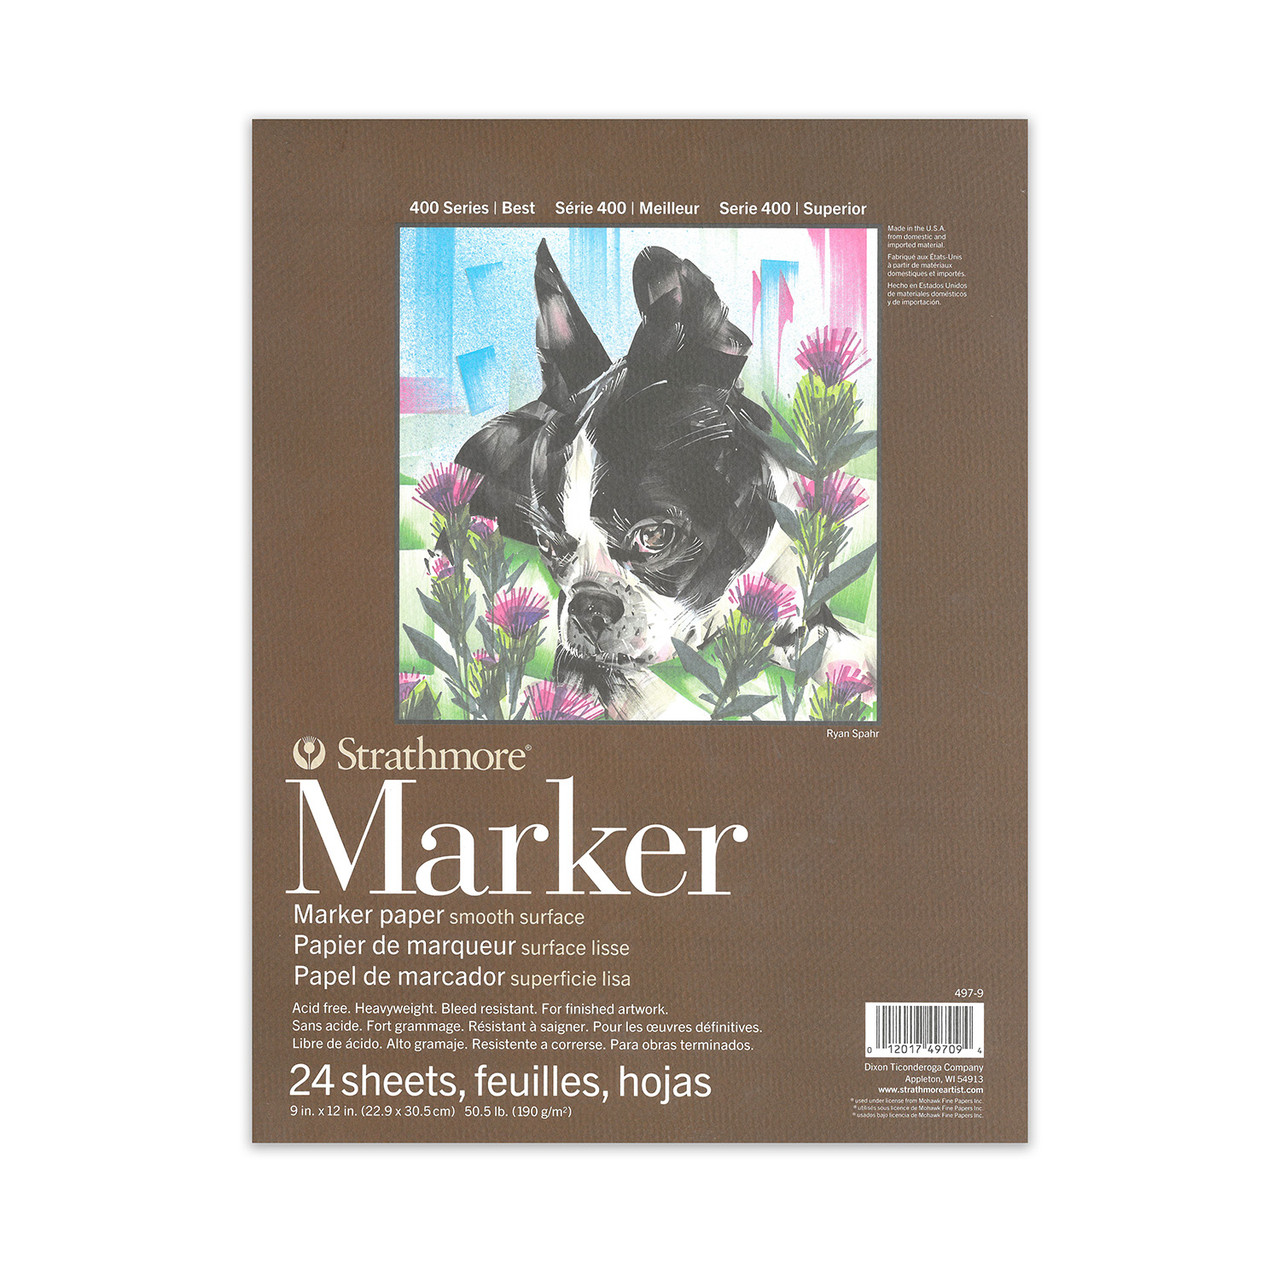 Review: Strathmore Marker Paper